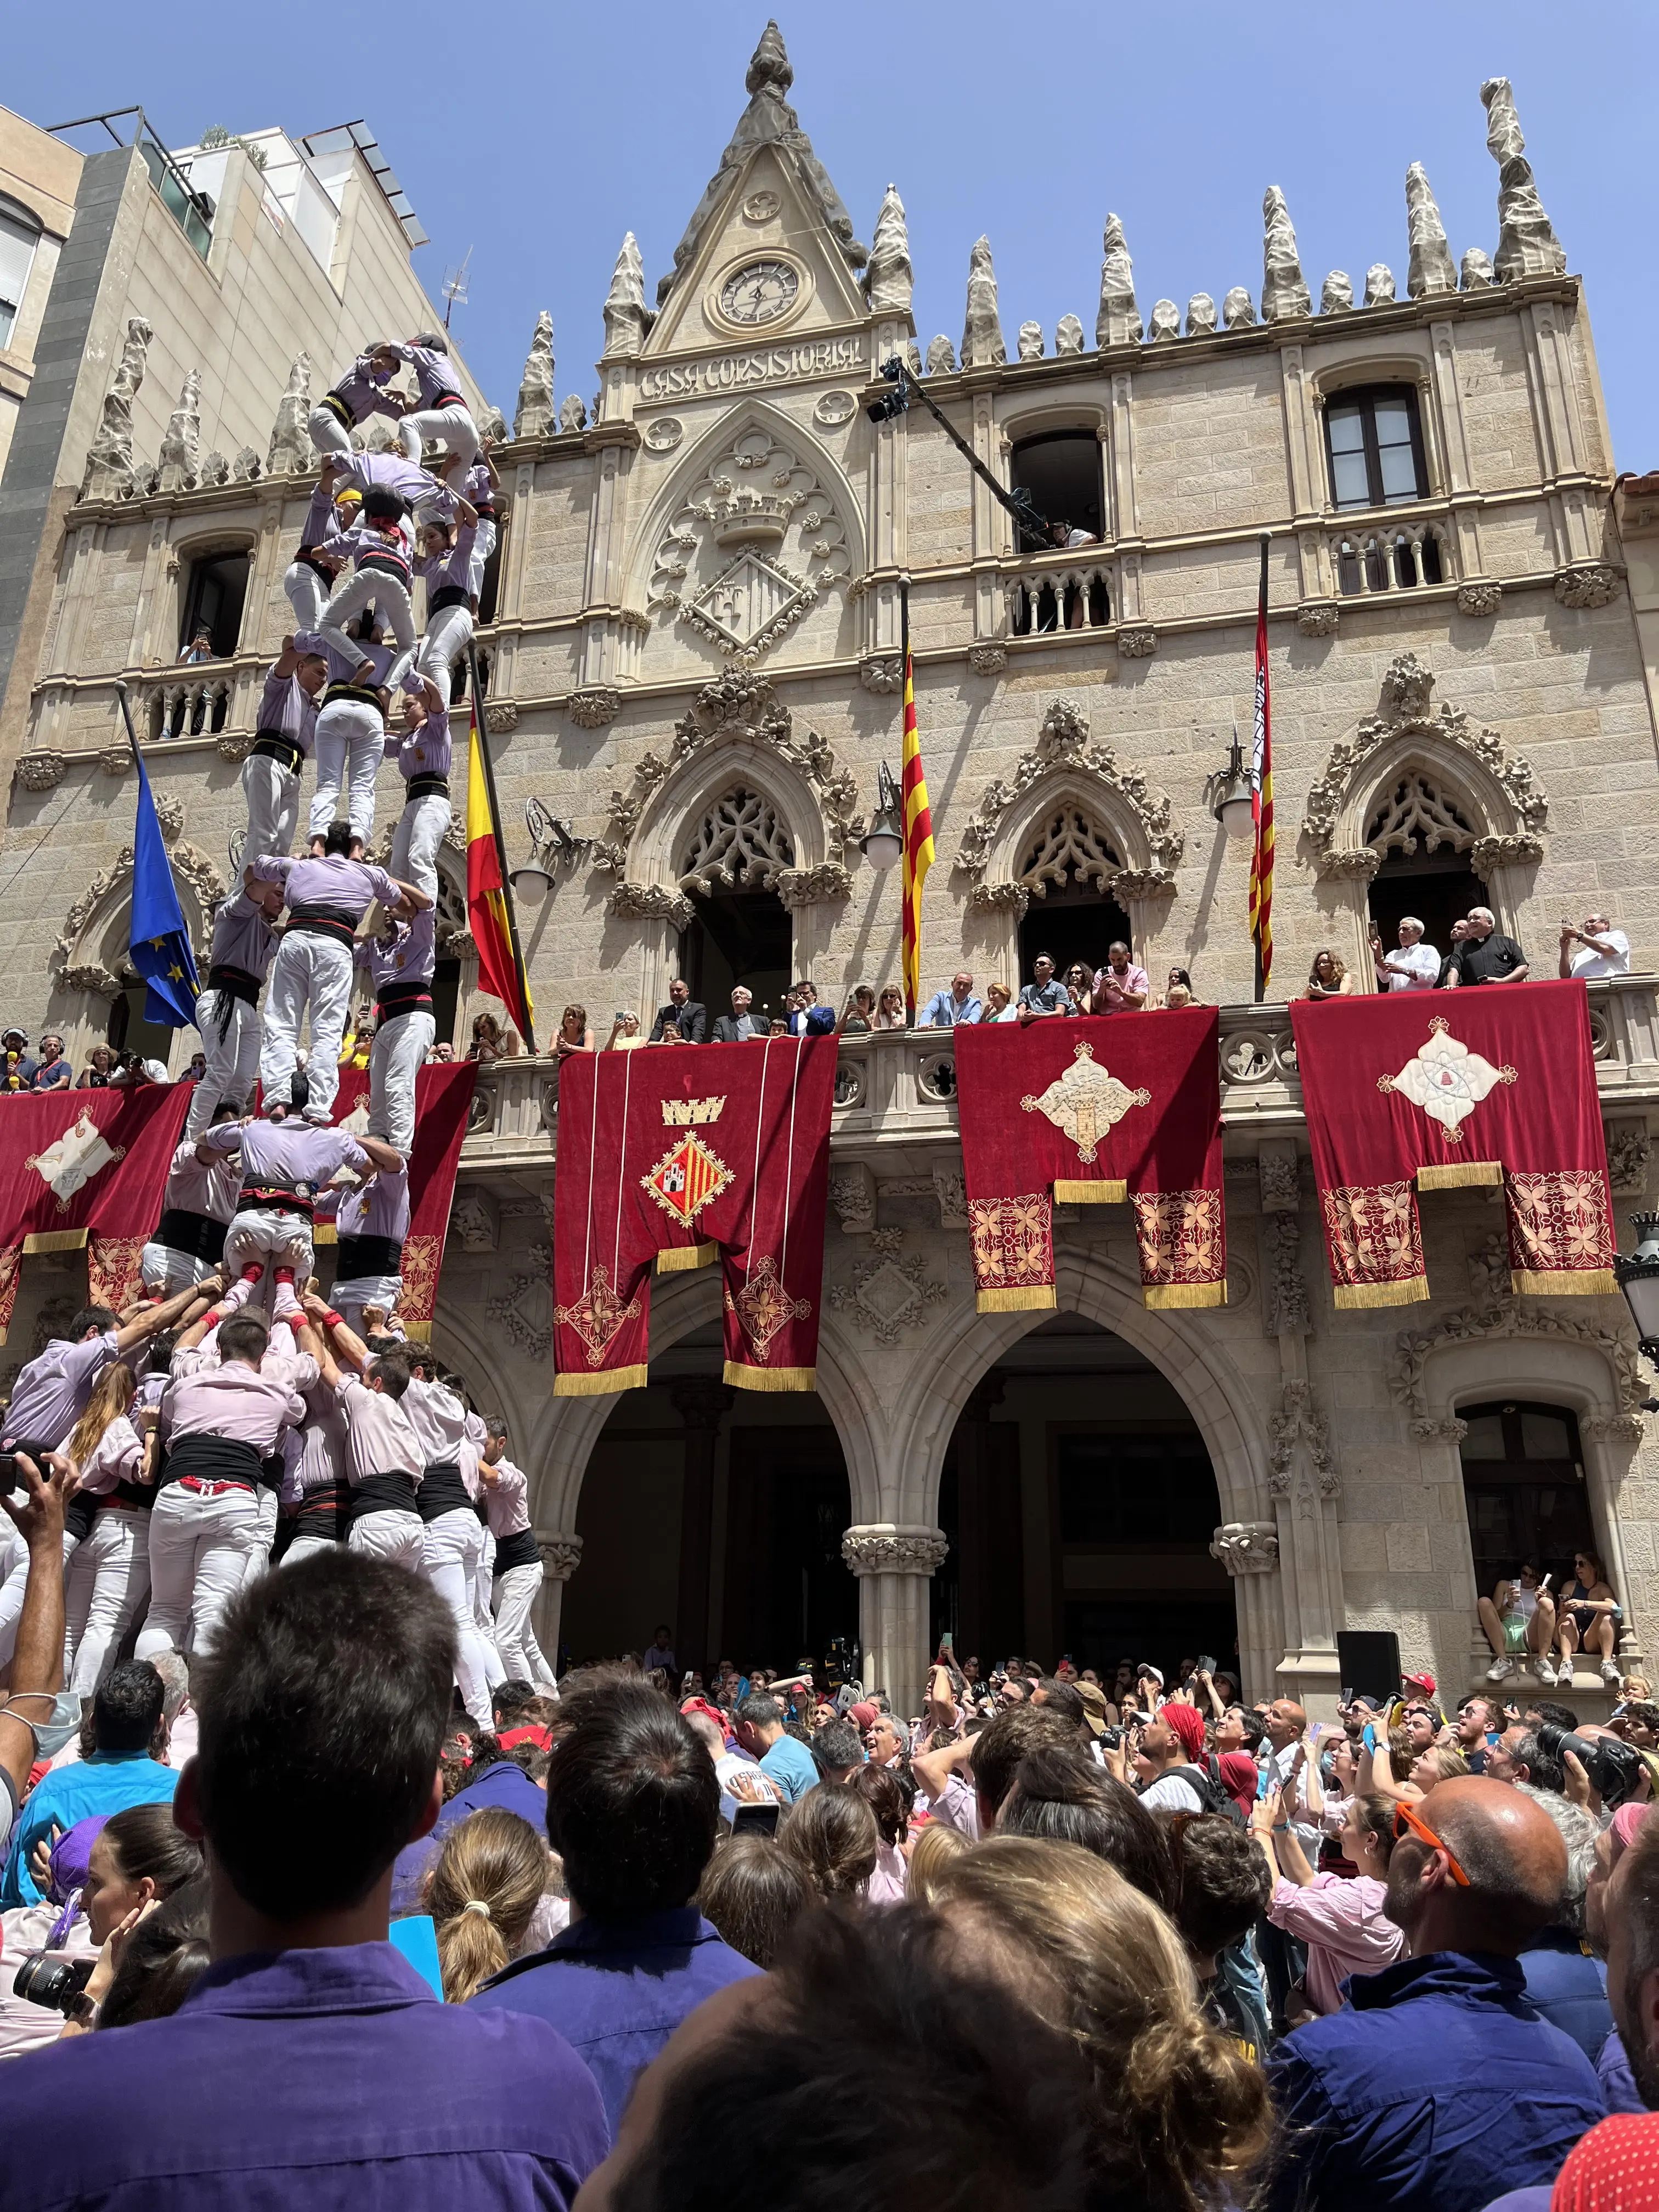 A &lsquo;castell&rsquo; (human tower) being built during a festival in Spain